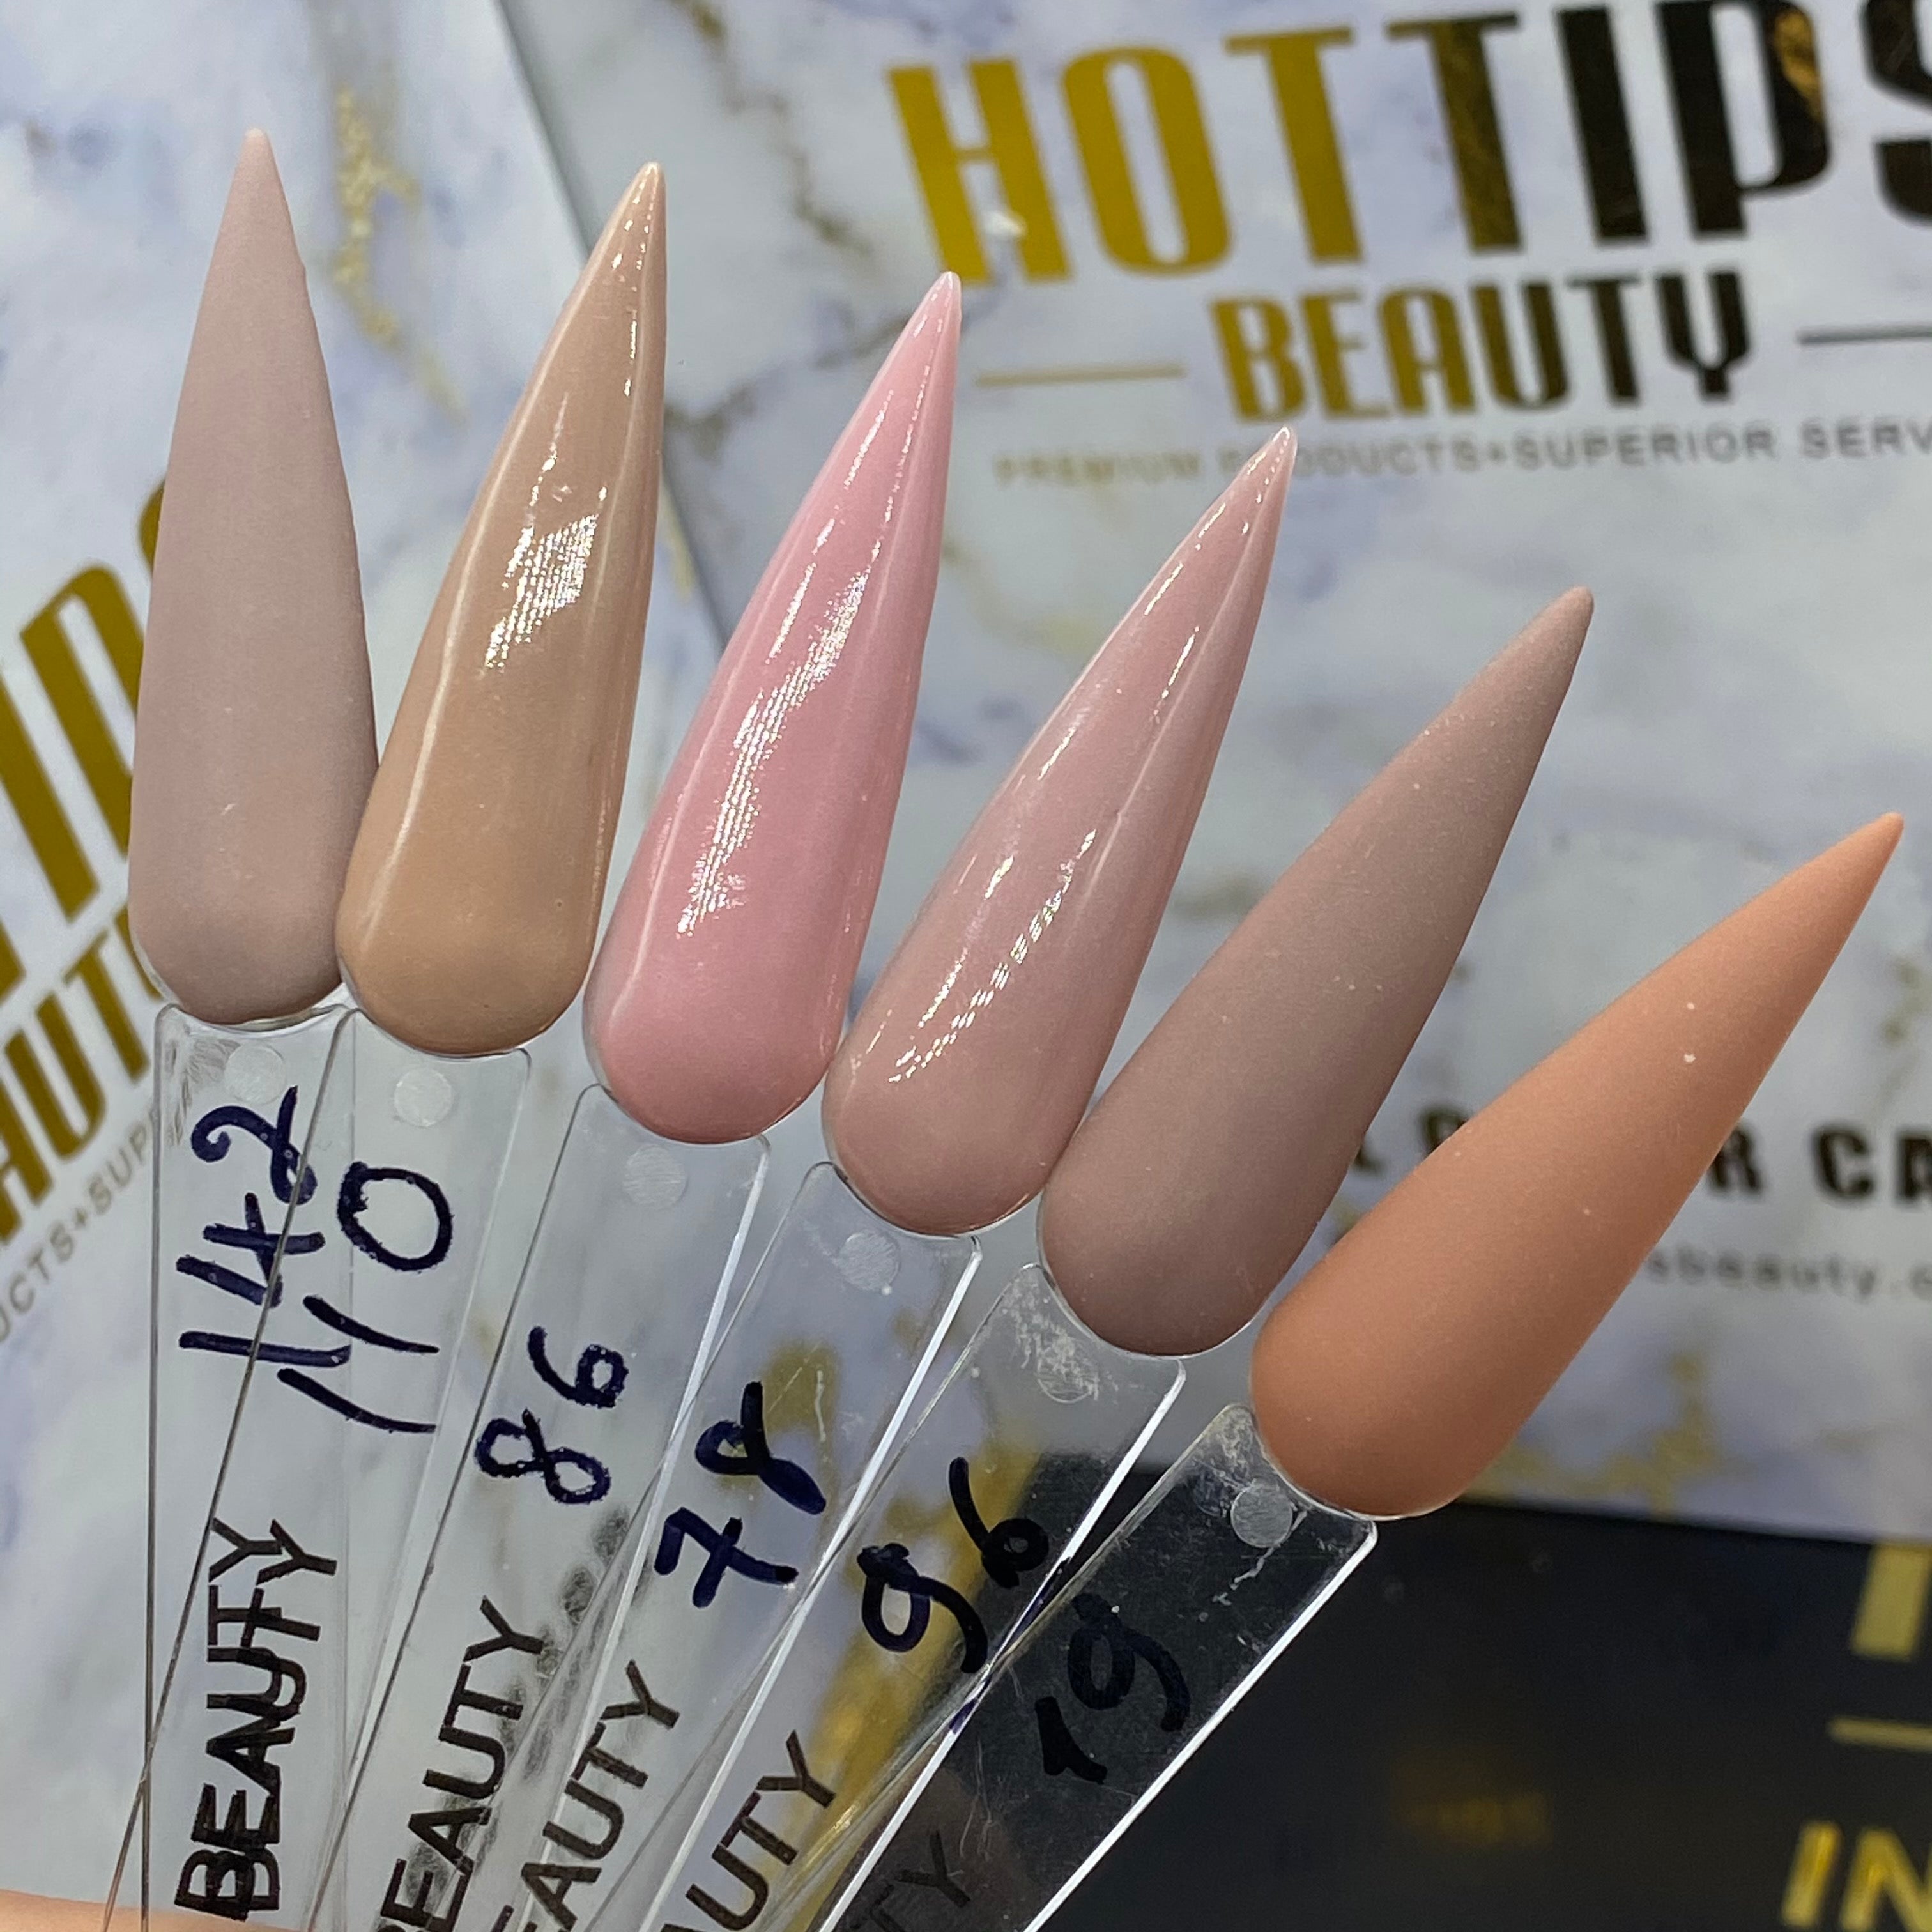 Acrylic Nude Collection 2 ( 6 colors #142; 110; 86; 78; 96; 19)